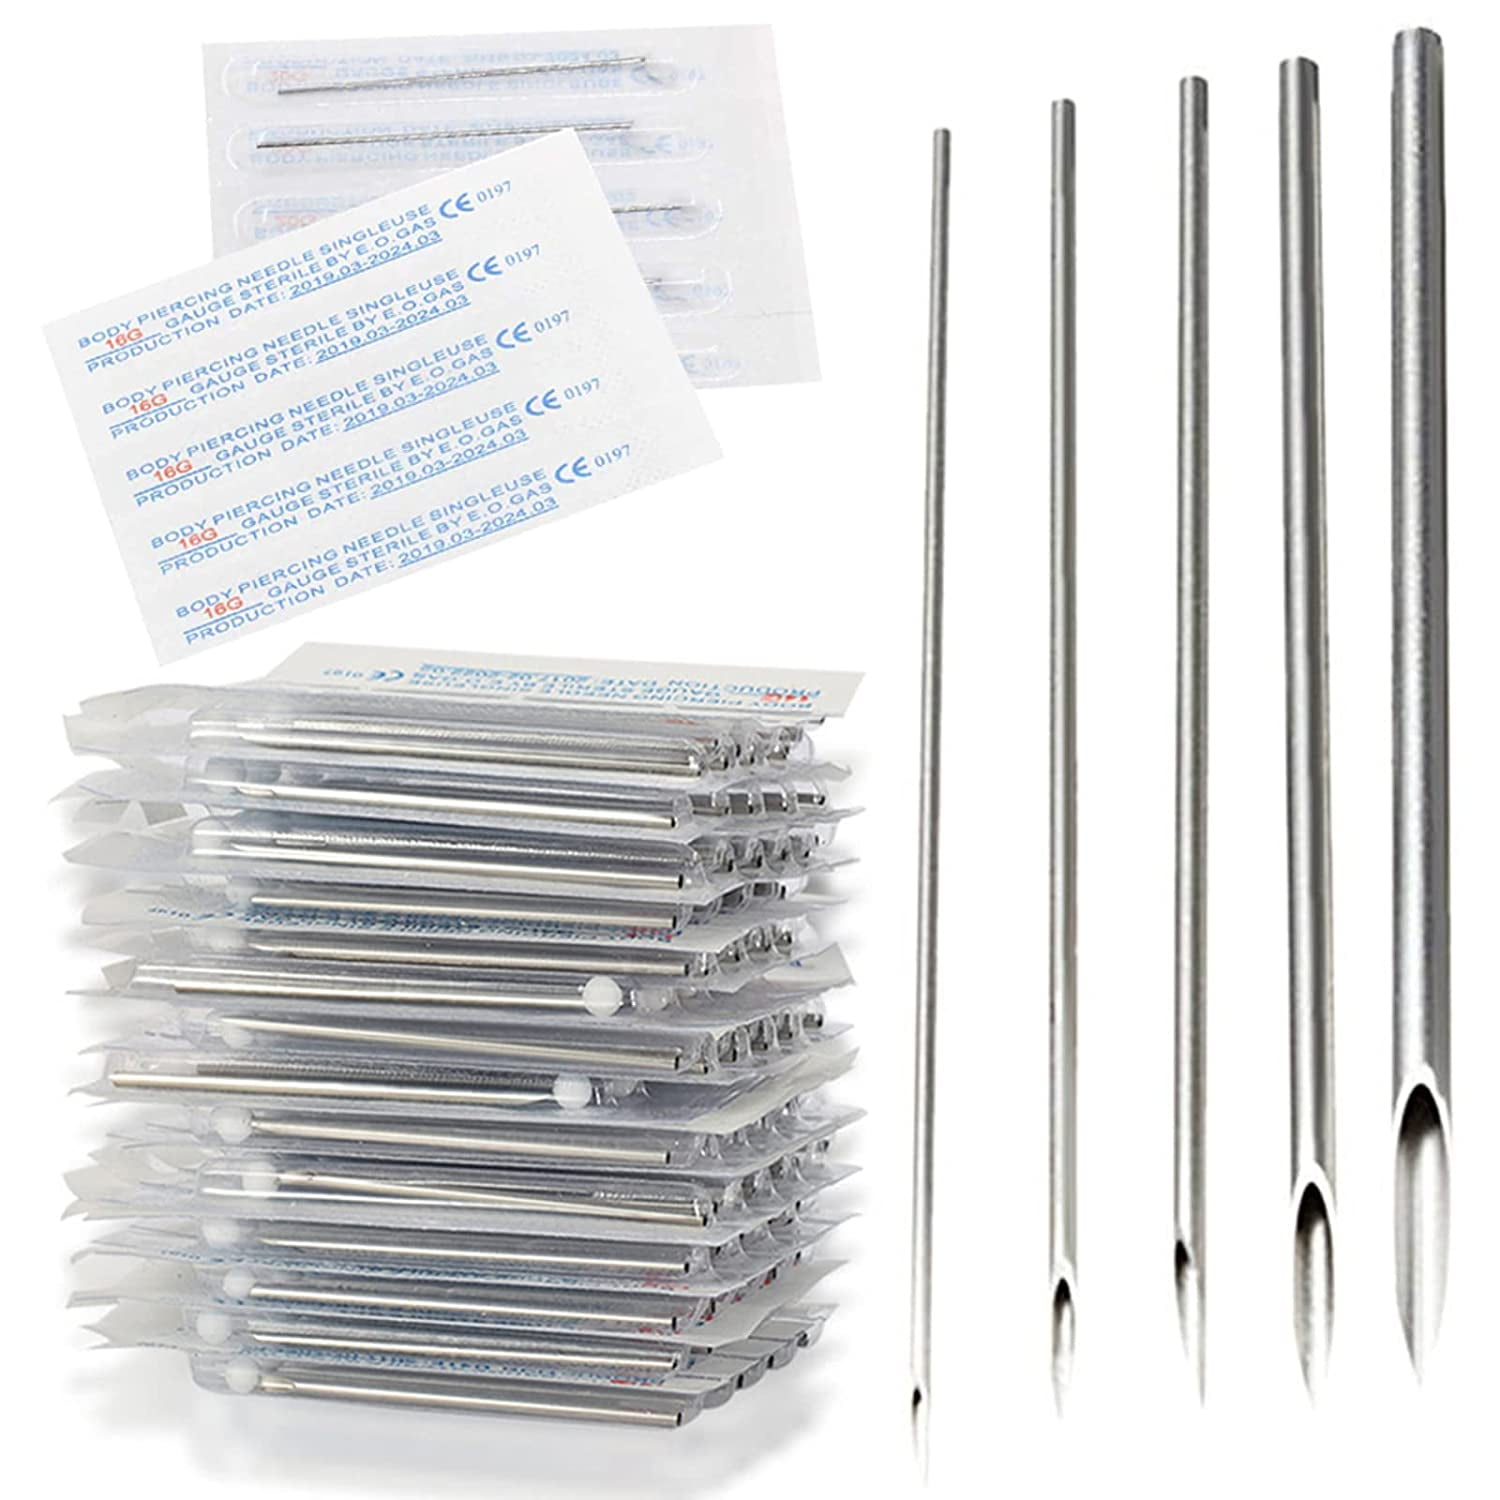 Set of 100 needles for piercings in your choice of gauge